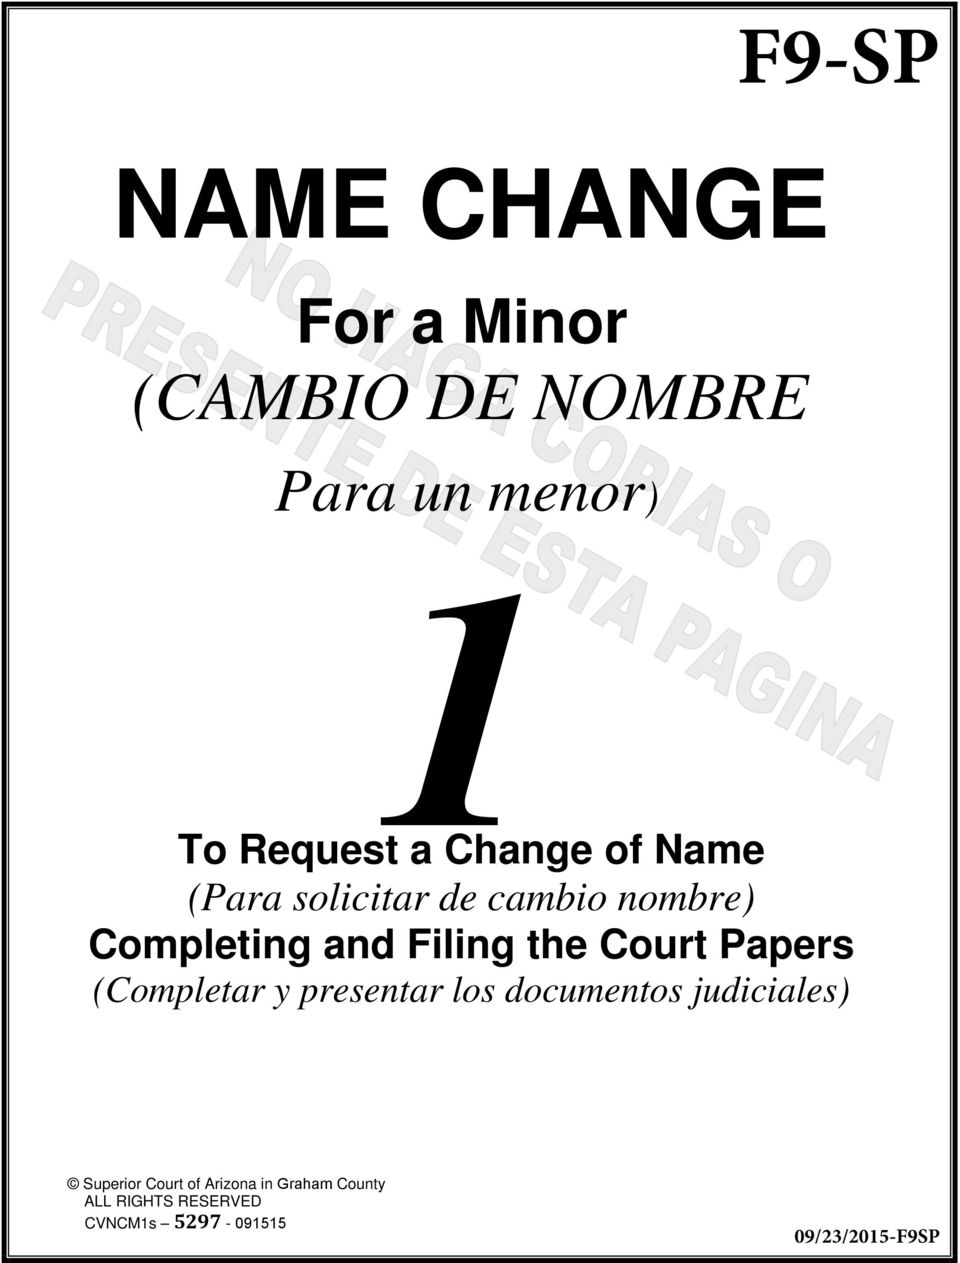 nombre) Completing and Filing the Court Papers (Completar y